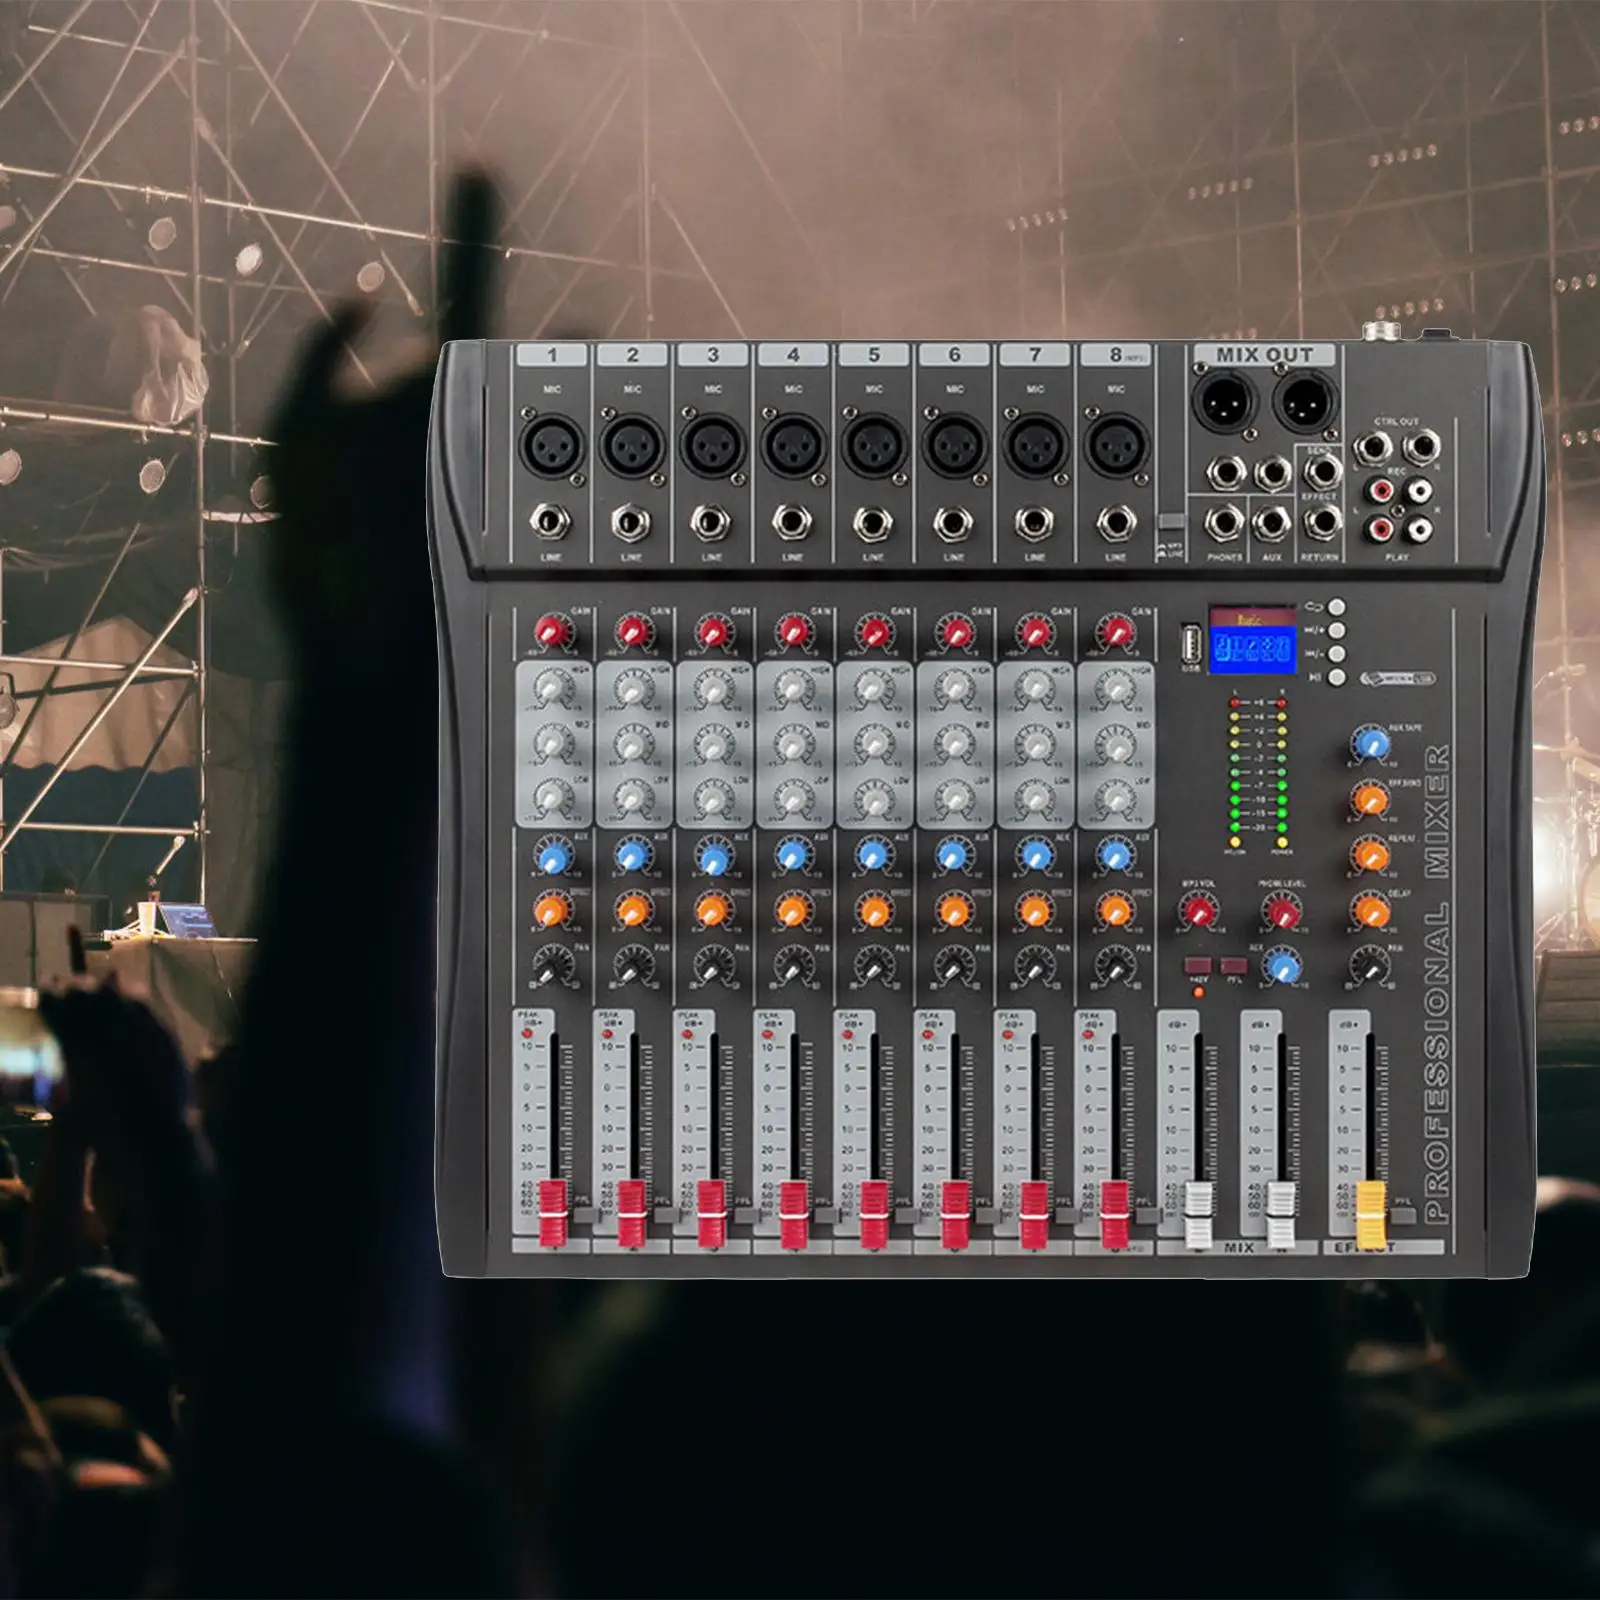 8 Channels Audio Mixer Digital Mixer EU Plug for Recording DJ Stage for Studio Recording Stable Transmission Durable Portable